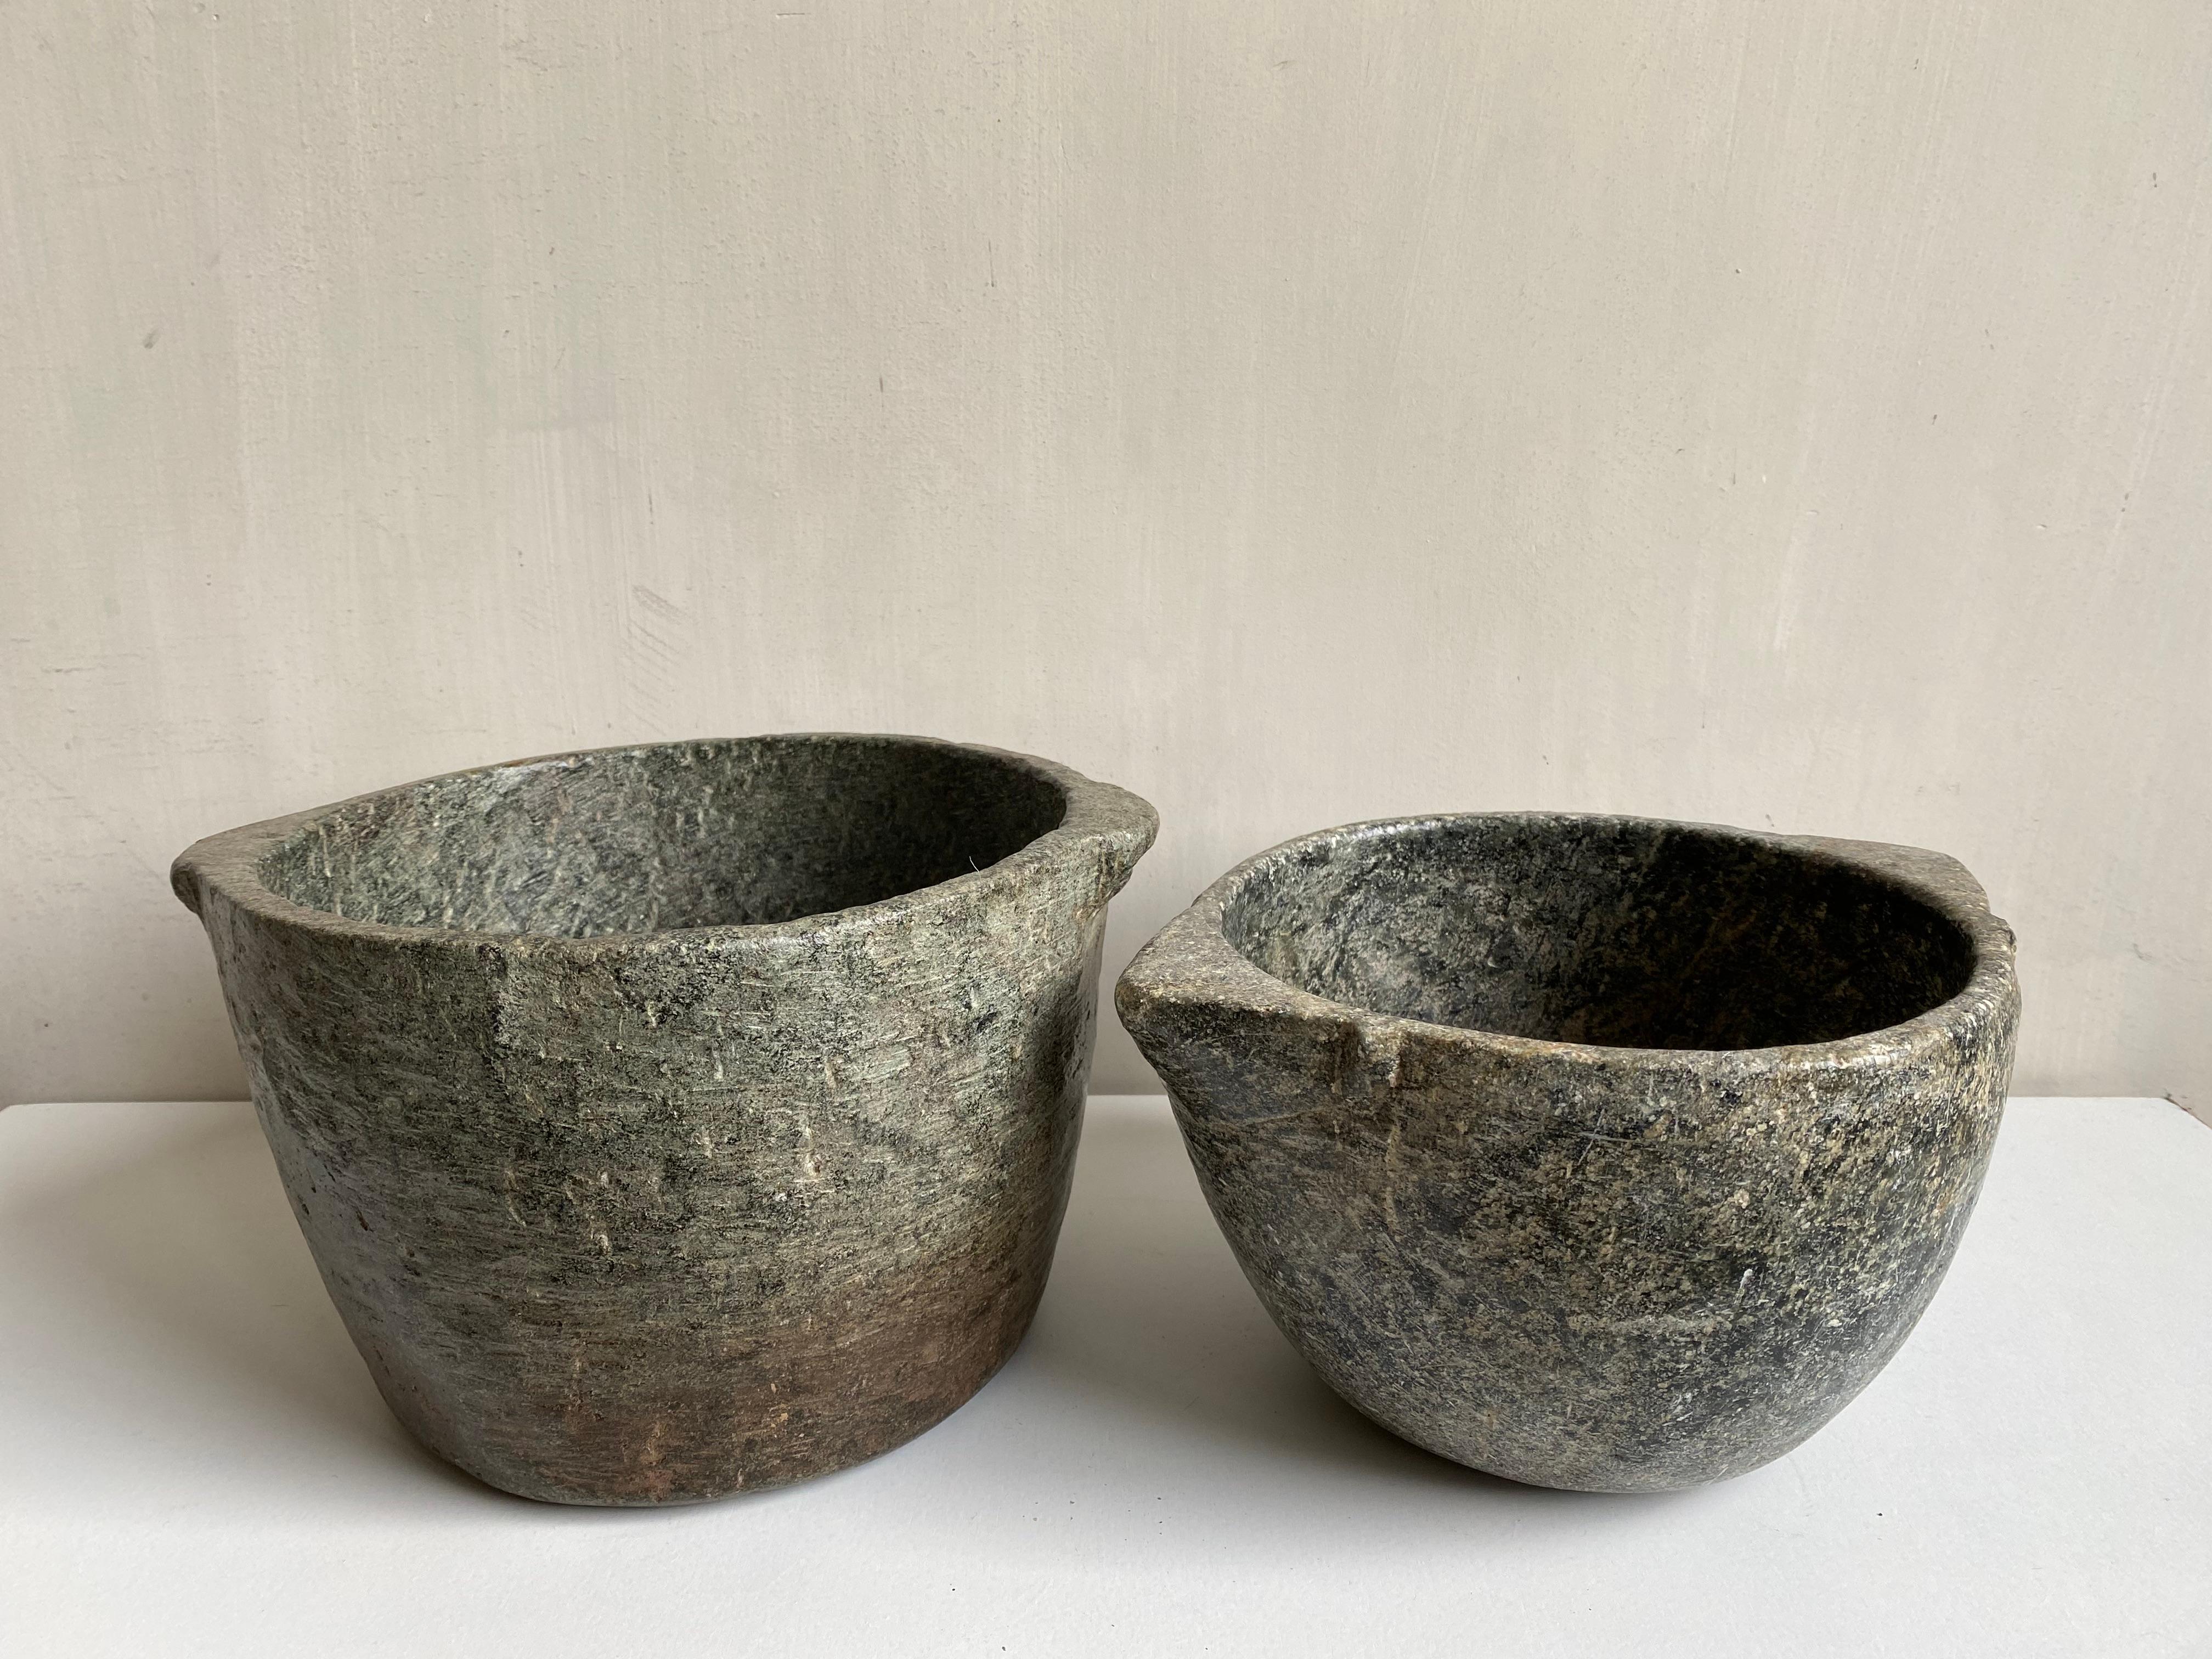 This is 1 of 2 stock bowls in Spanish marble.
The marble has a gray-green color and a lot of patina due to age.
Silky soft patina from use.
Subtle handles cut from one piece.


We ship safely worldwide.